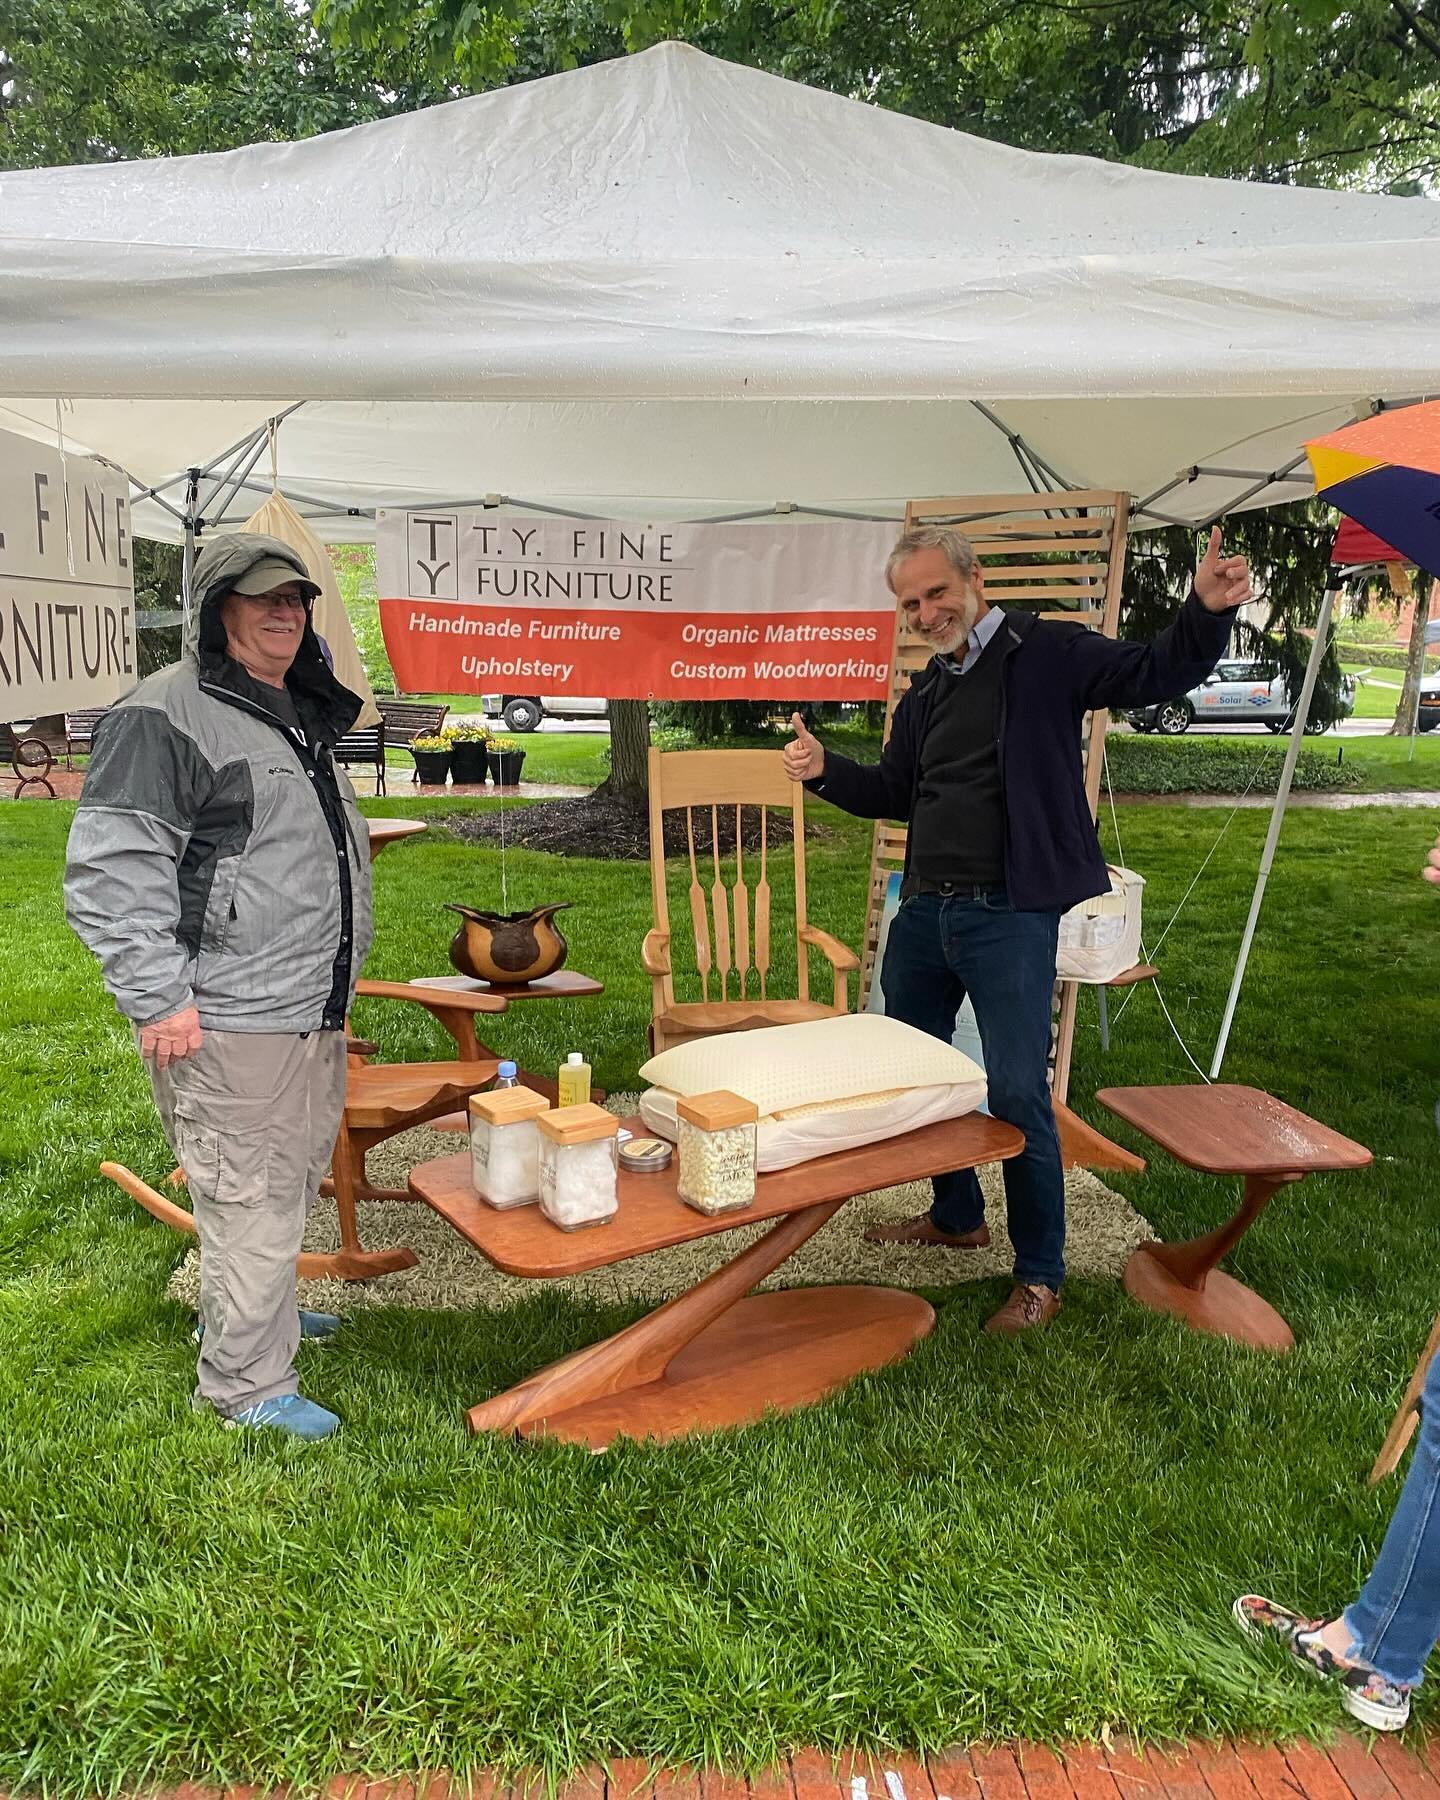 Well, rain certainly brings the green! We&rsquo;re here at Green on the Green rain or shine! Come learn about all the sustainable options available to residents! Saturday 5/11, 9am-1pm